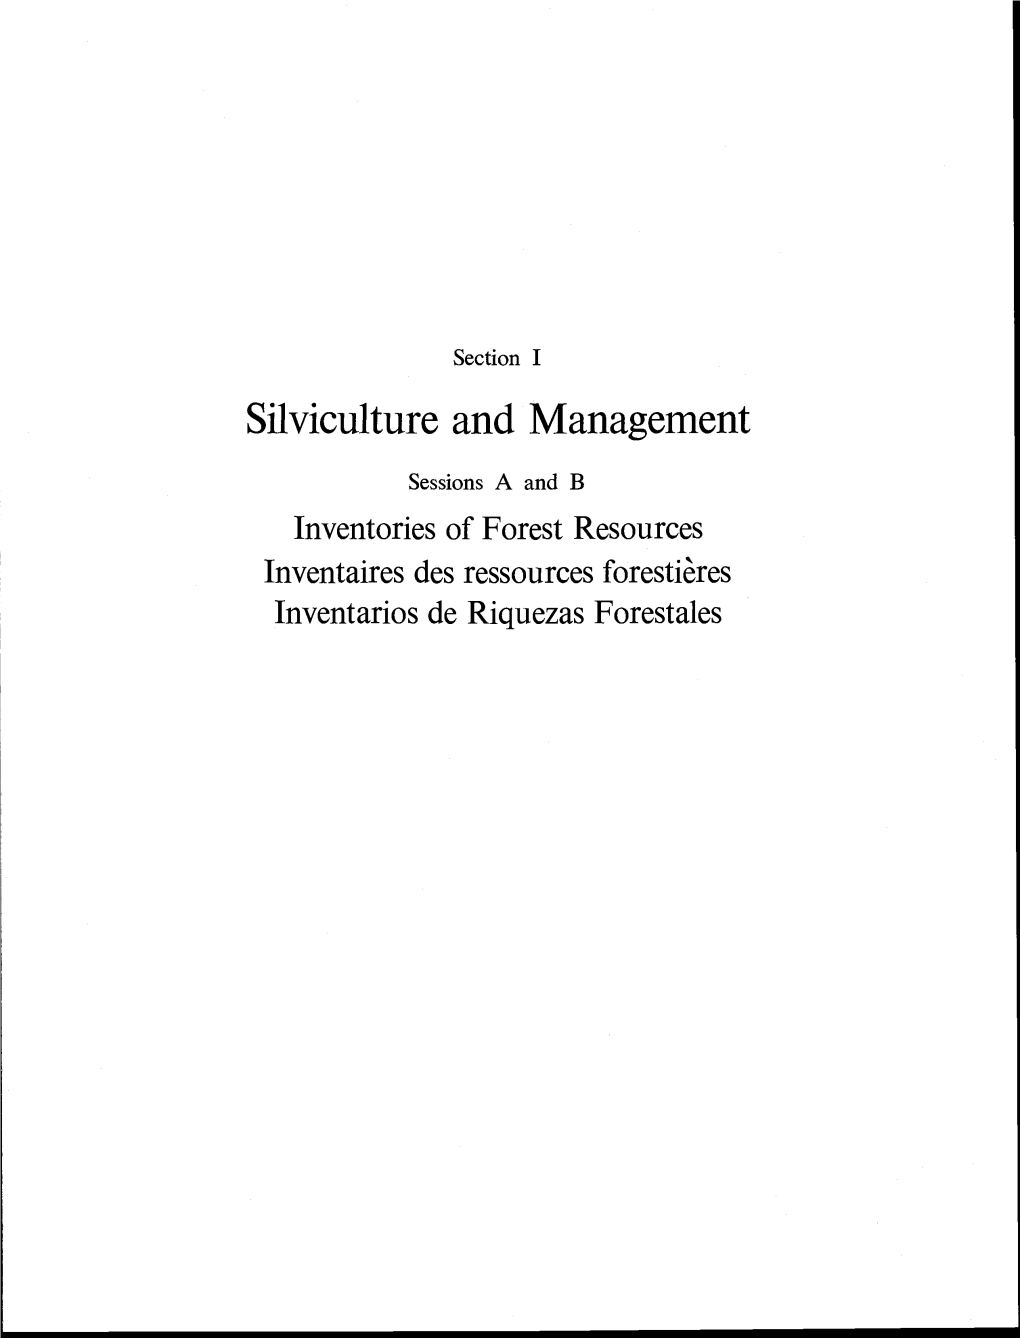 Silviculture and Management